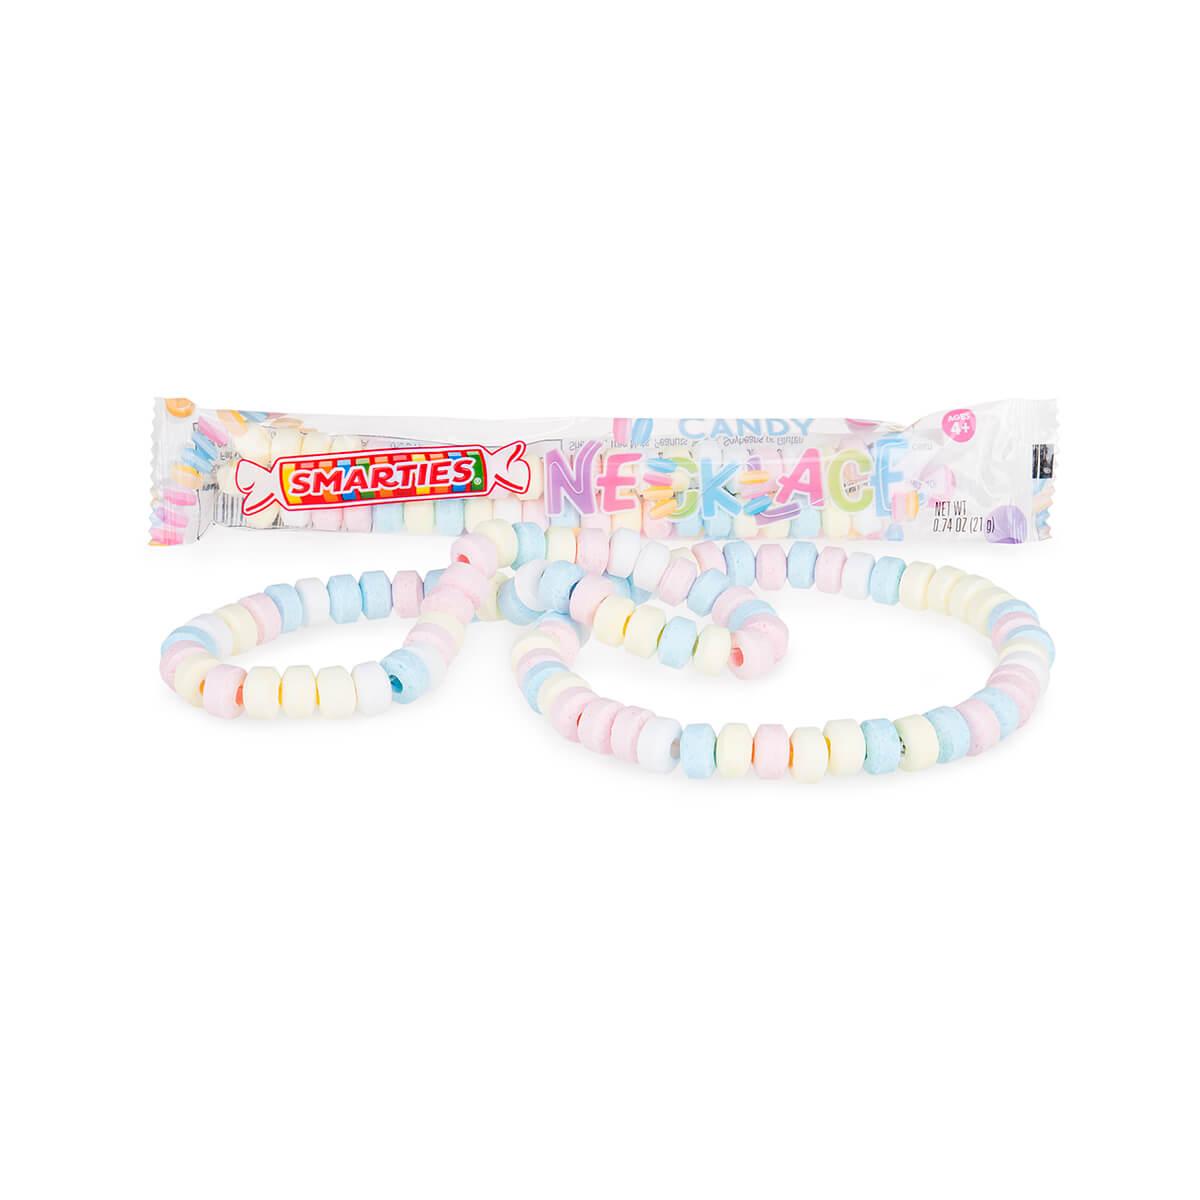  Necklace Candy - 1 Lb.